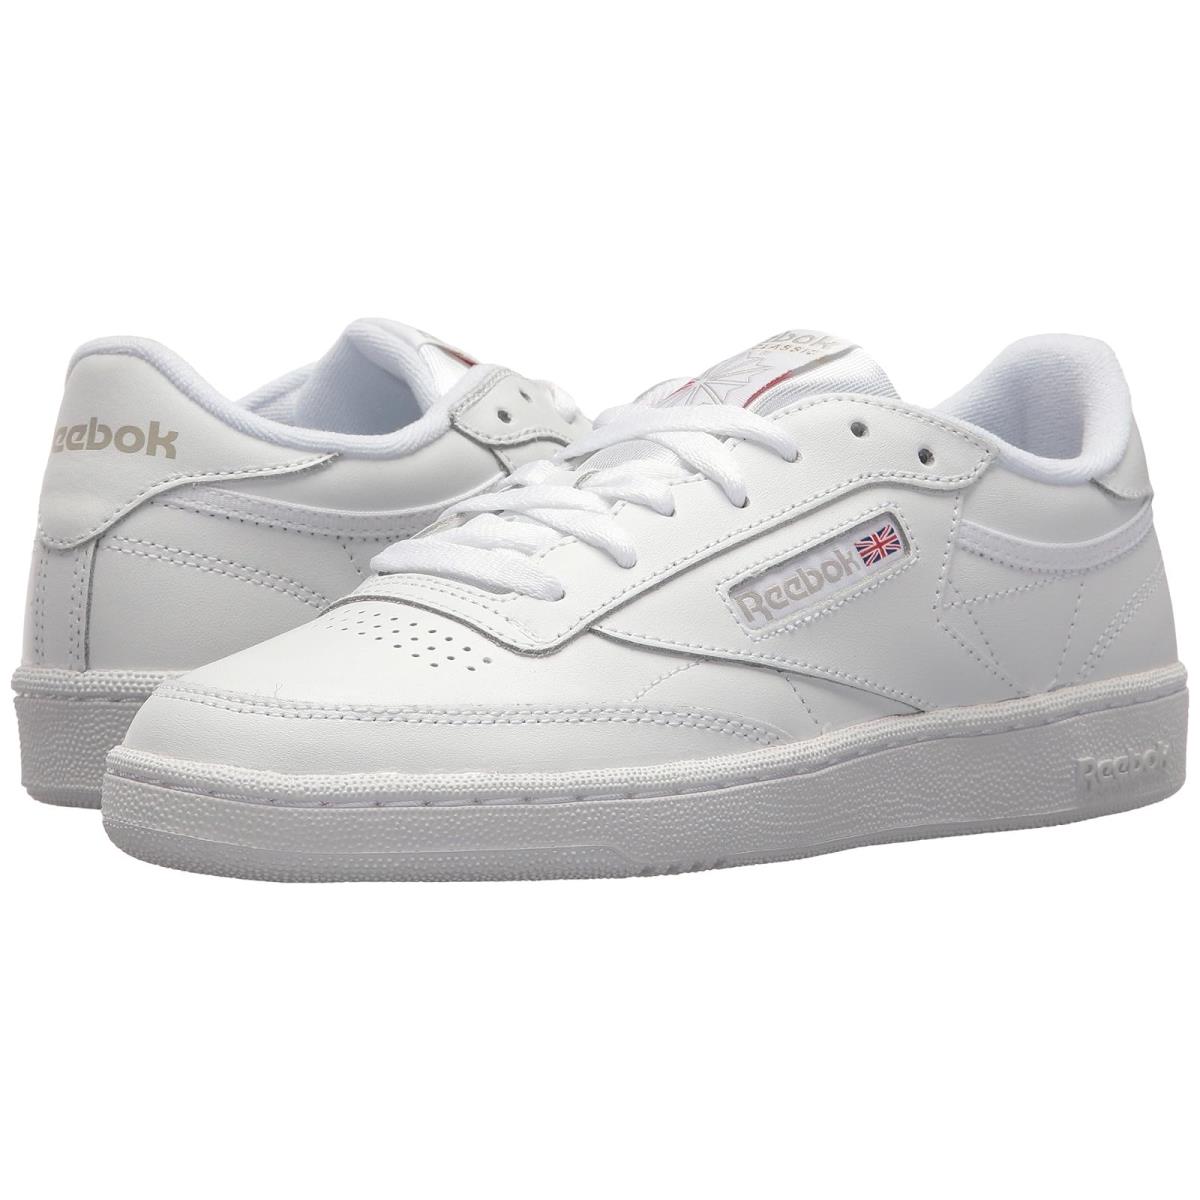 Woman`s Sneakers Athletic Shoes Reebok Lifestyle Club C 85 White/Light Grey